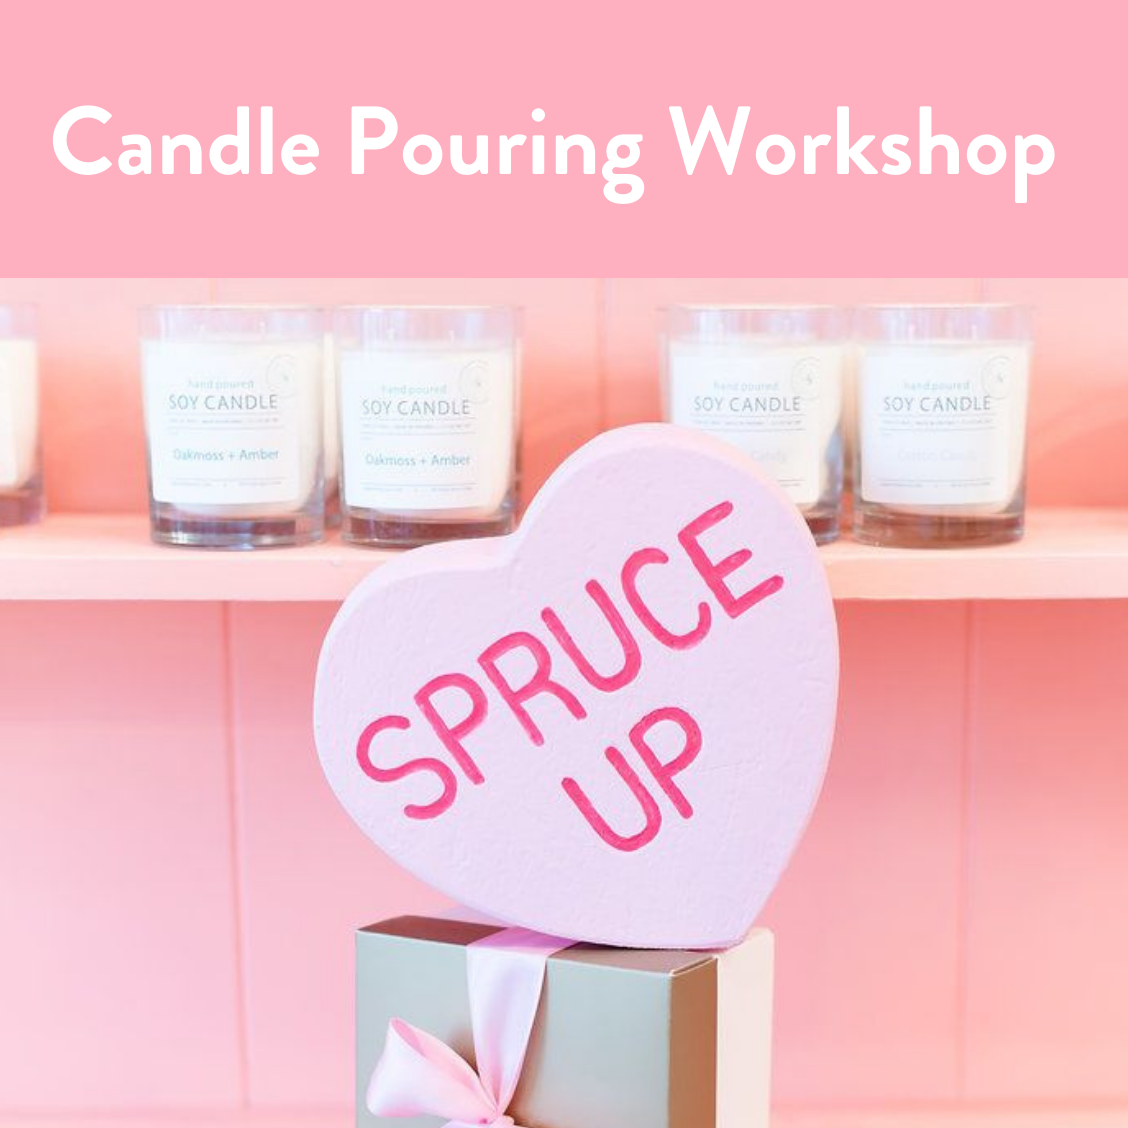 Candle Pouring Workshop Gift Certificate